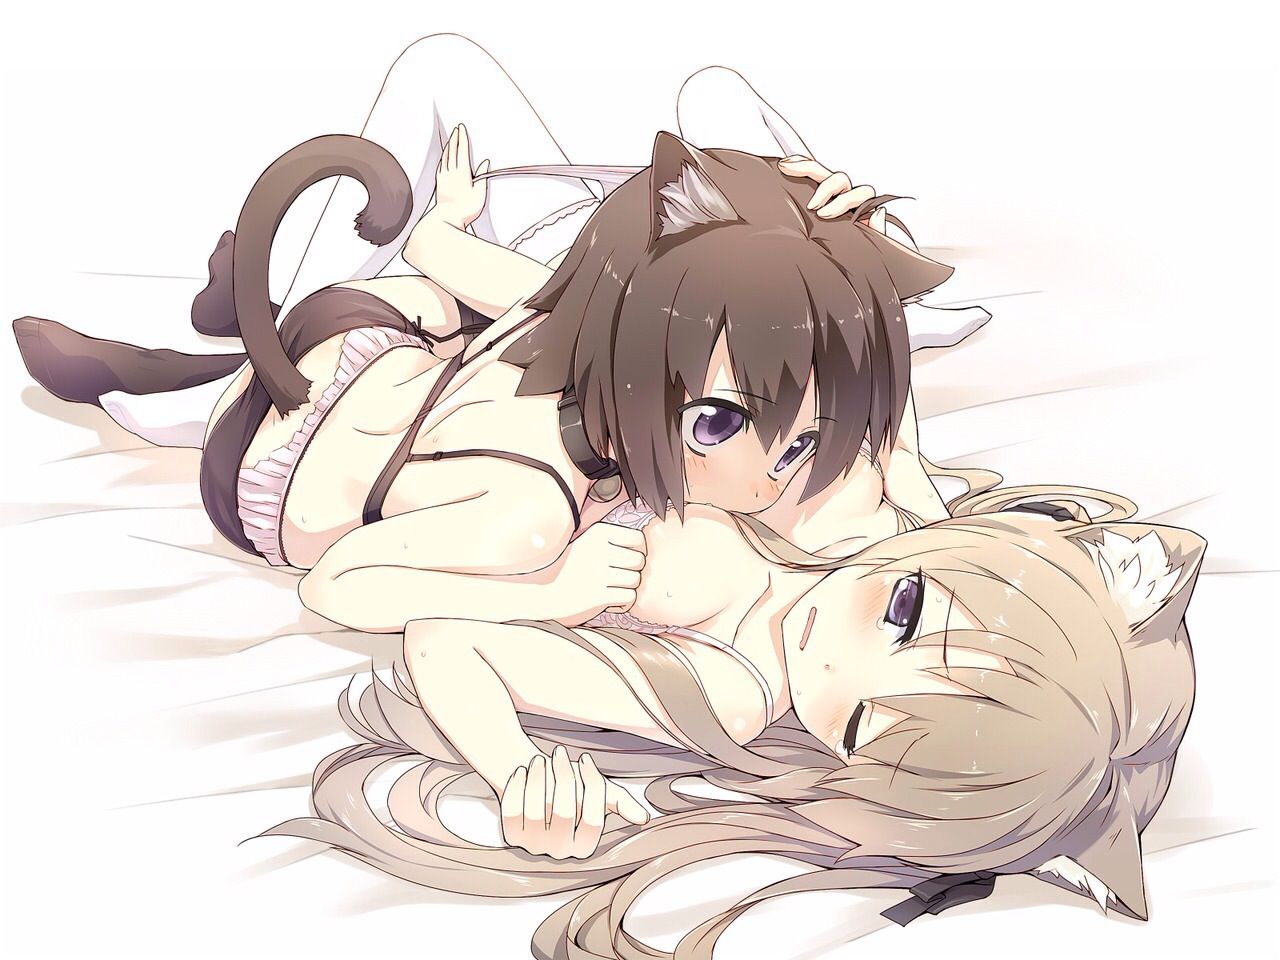 Erotic images coming out of Yuri! 25